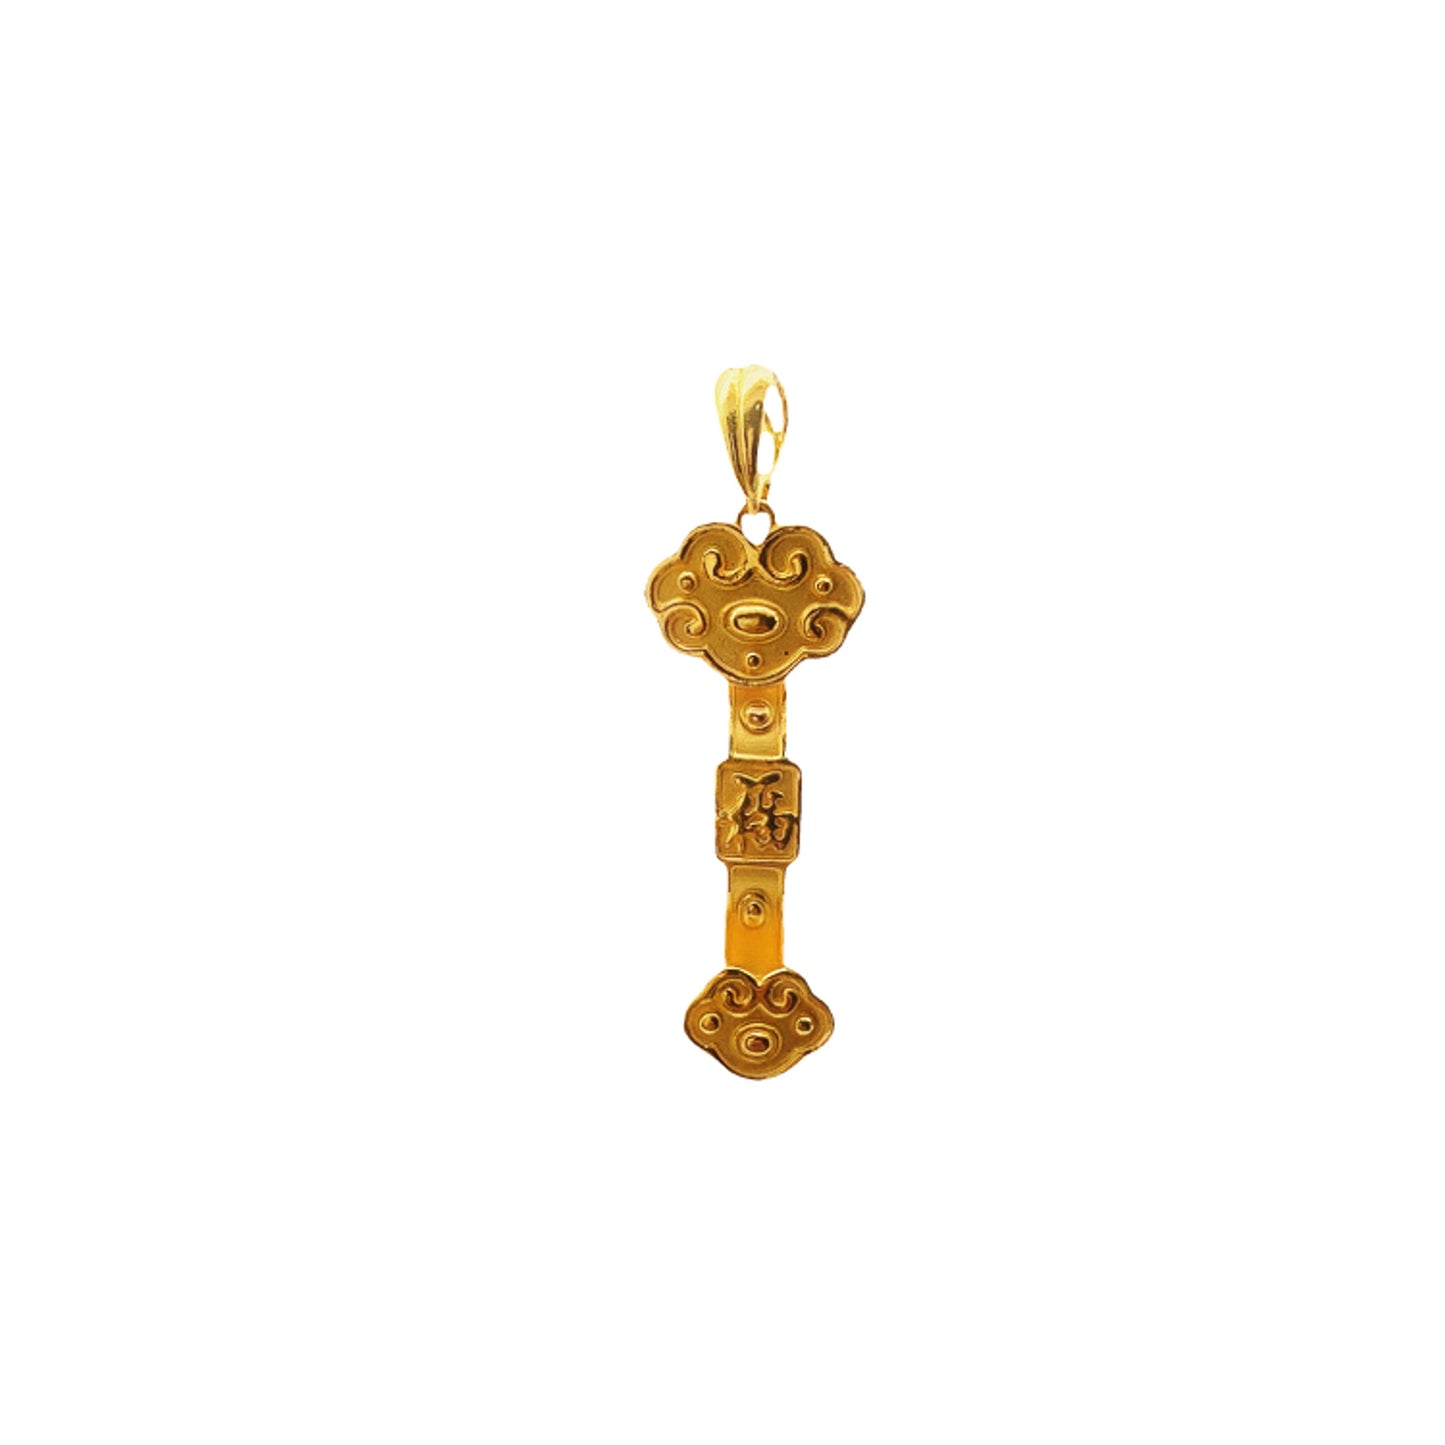 GOLD PENDANT ( 22K ) ( 4.29g ) - 0010934 Chain sold separately